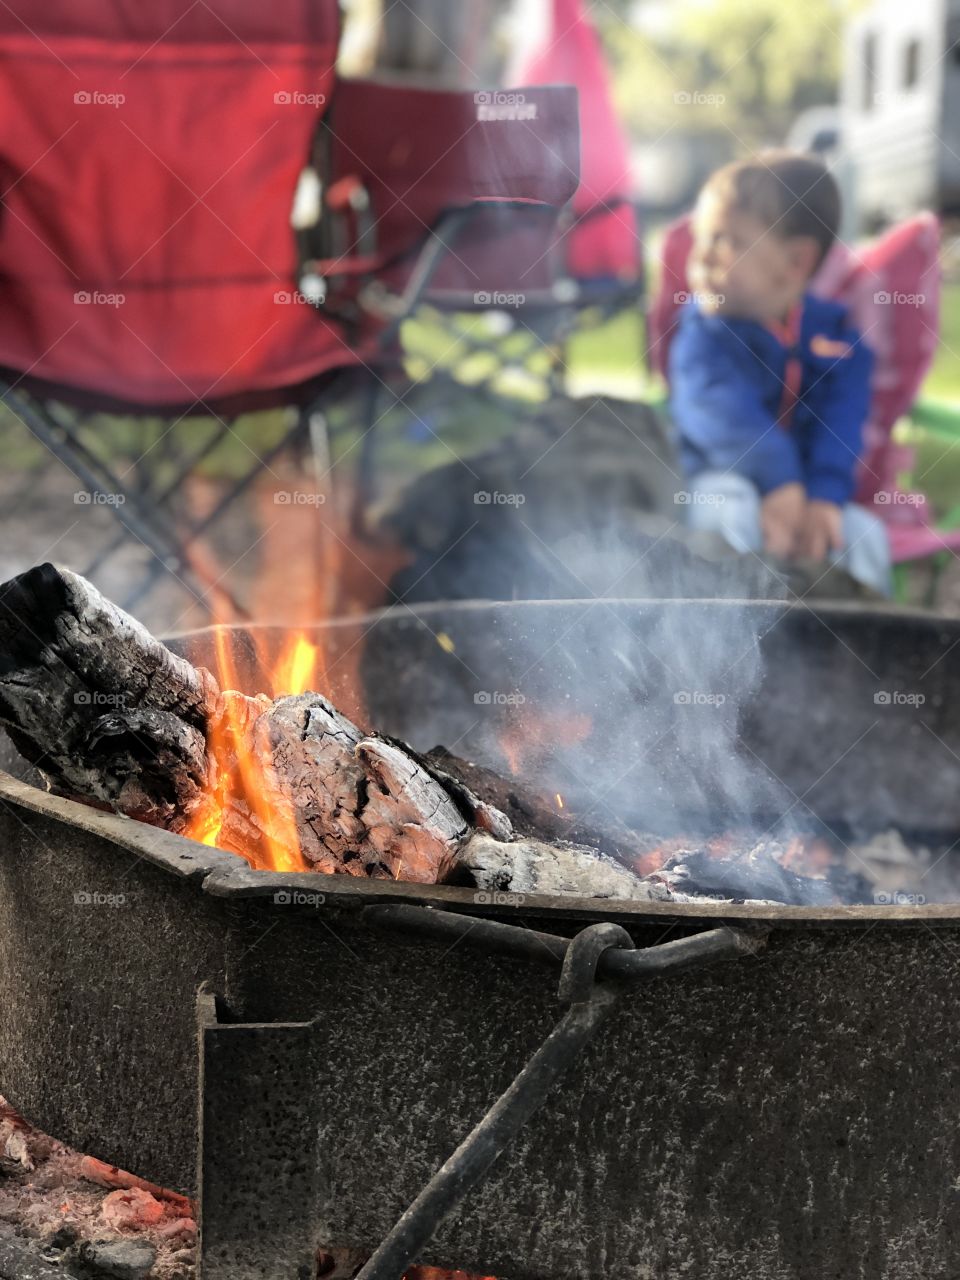 Camping out with kids